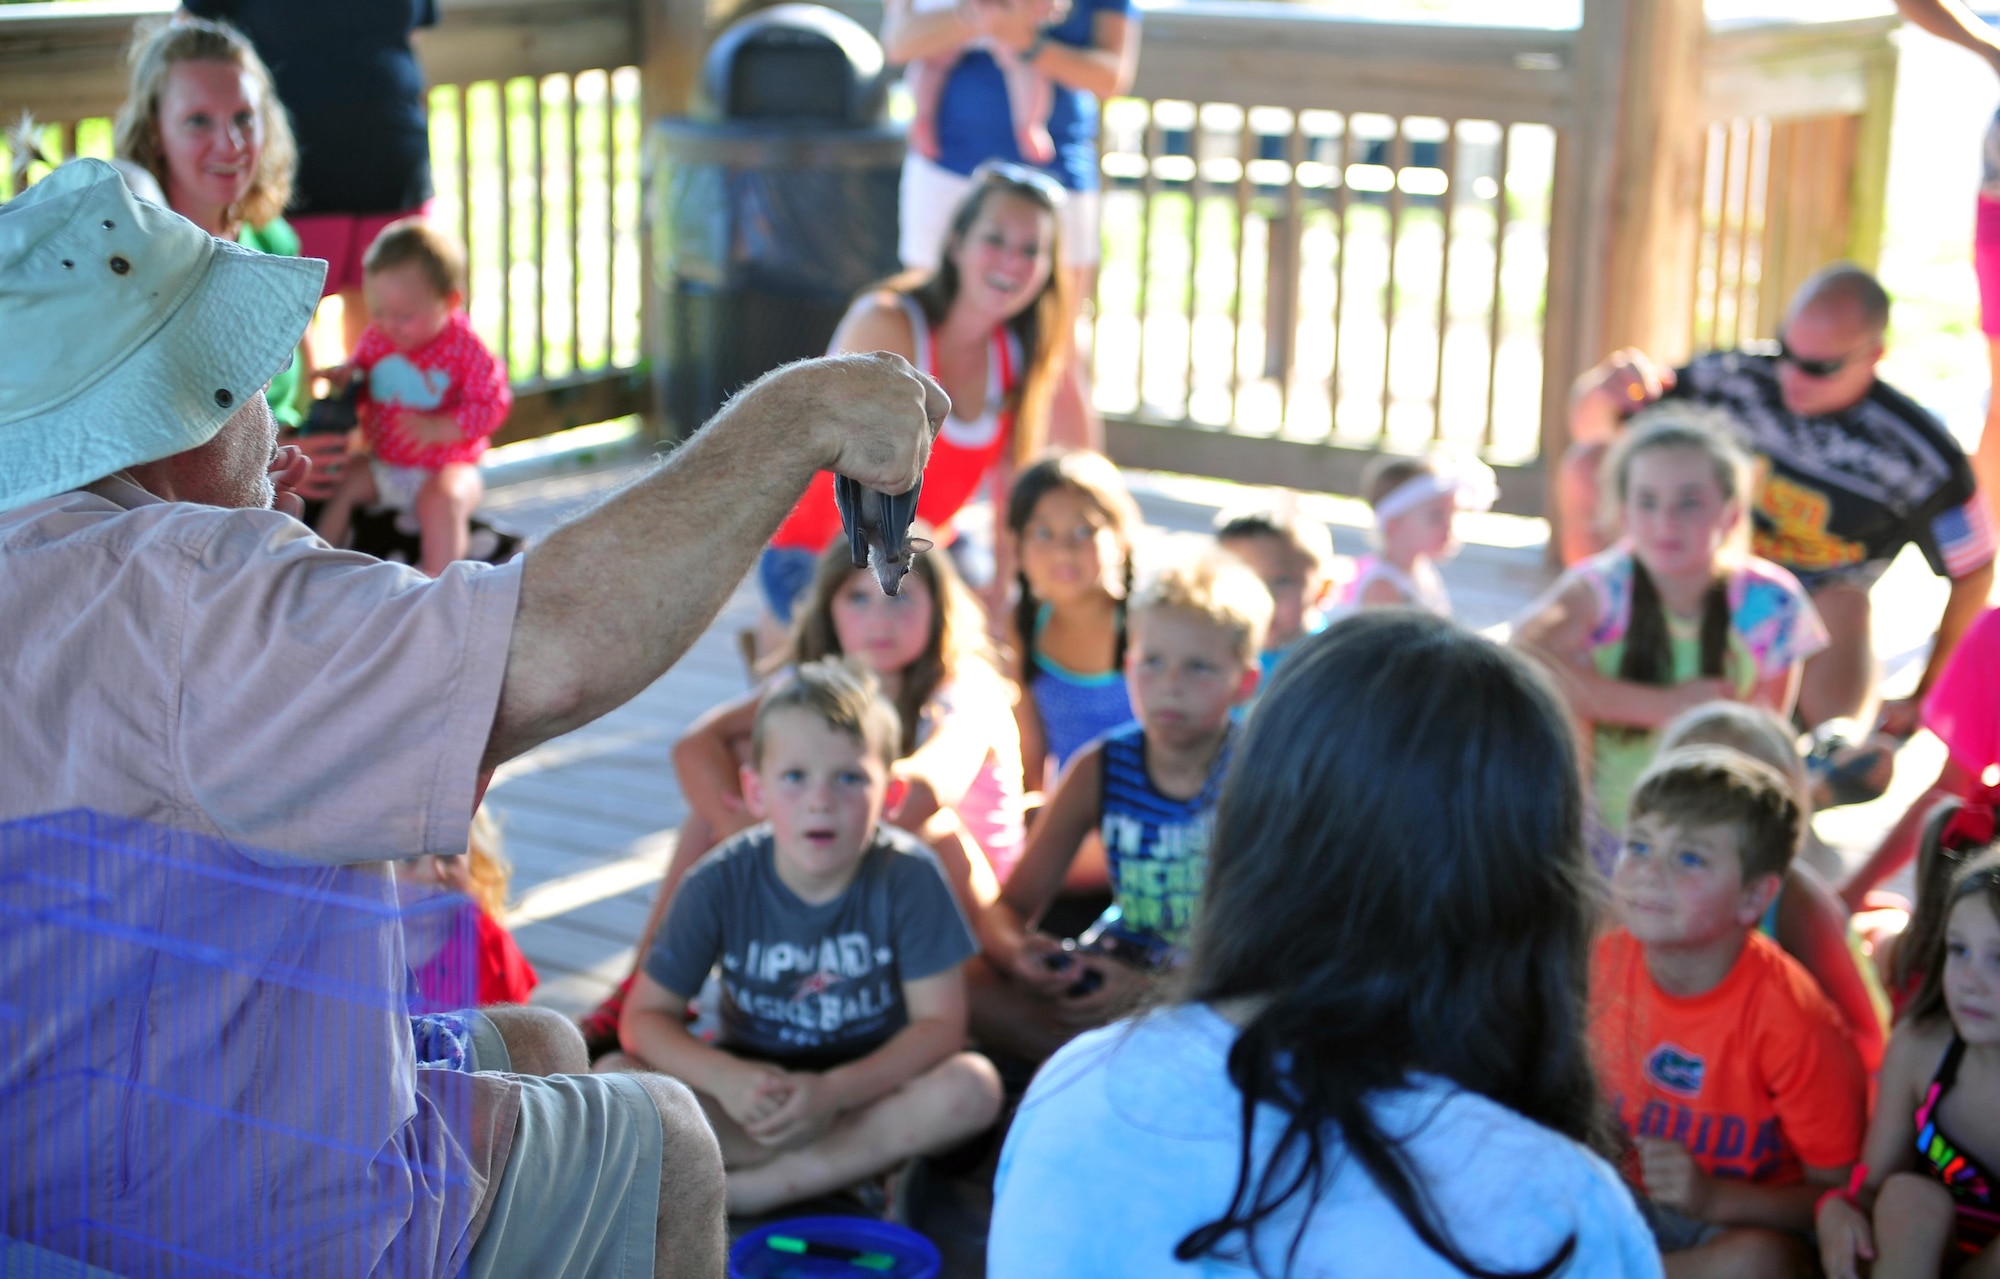 Todd Quinn, a zoology instructor at Lighthouse Christian Academy, holds up a bat for Hurlburt Field children to see during a Key Spouse and Deployed Family Barbeque at the Soundside Marina on Hurlburt Field, Fla., June 23, 2016.Quinn entertained children with various fuzzy creatures in his care while explaining about each of the animals unique characteristics. (U.S. Air Force photo by Staff Sgt. Kentavist P. Brackin)